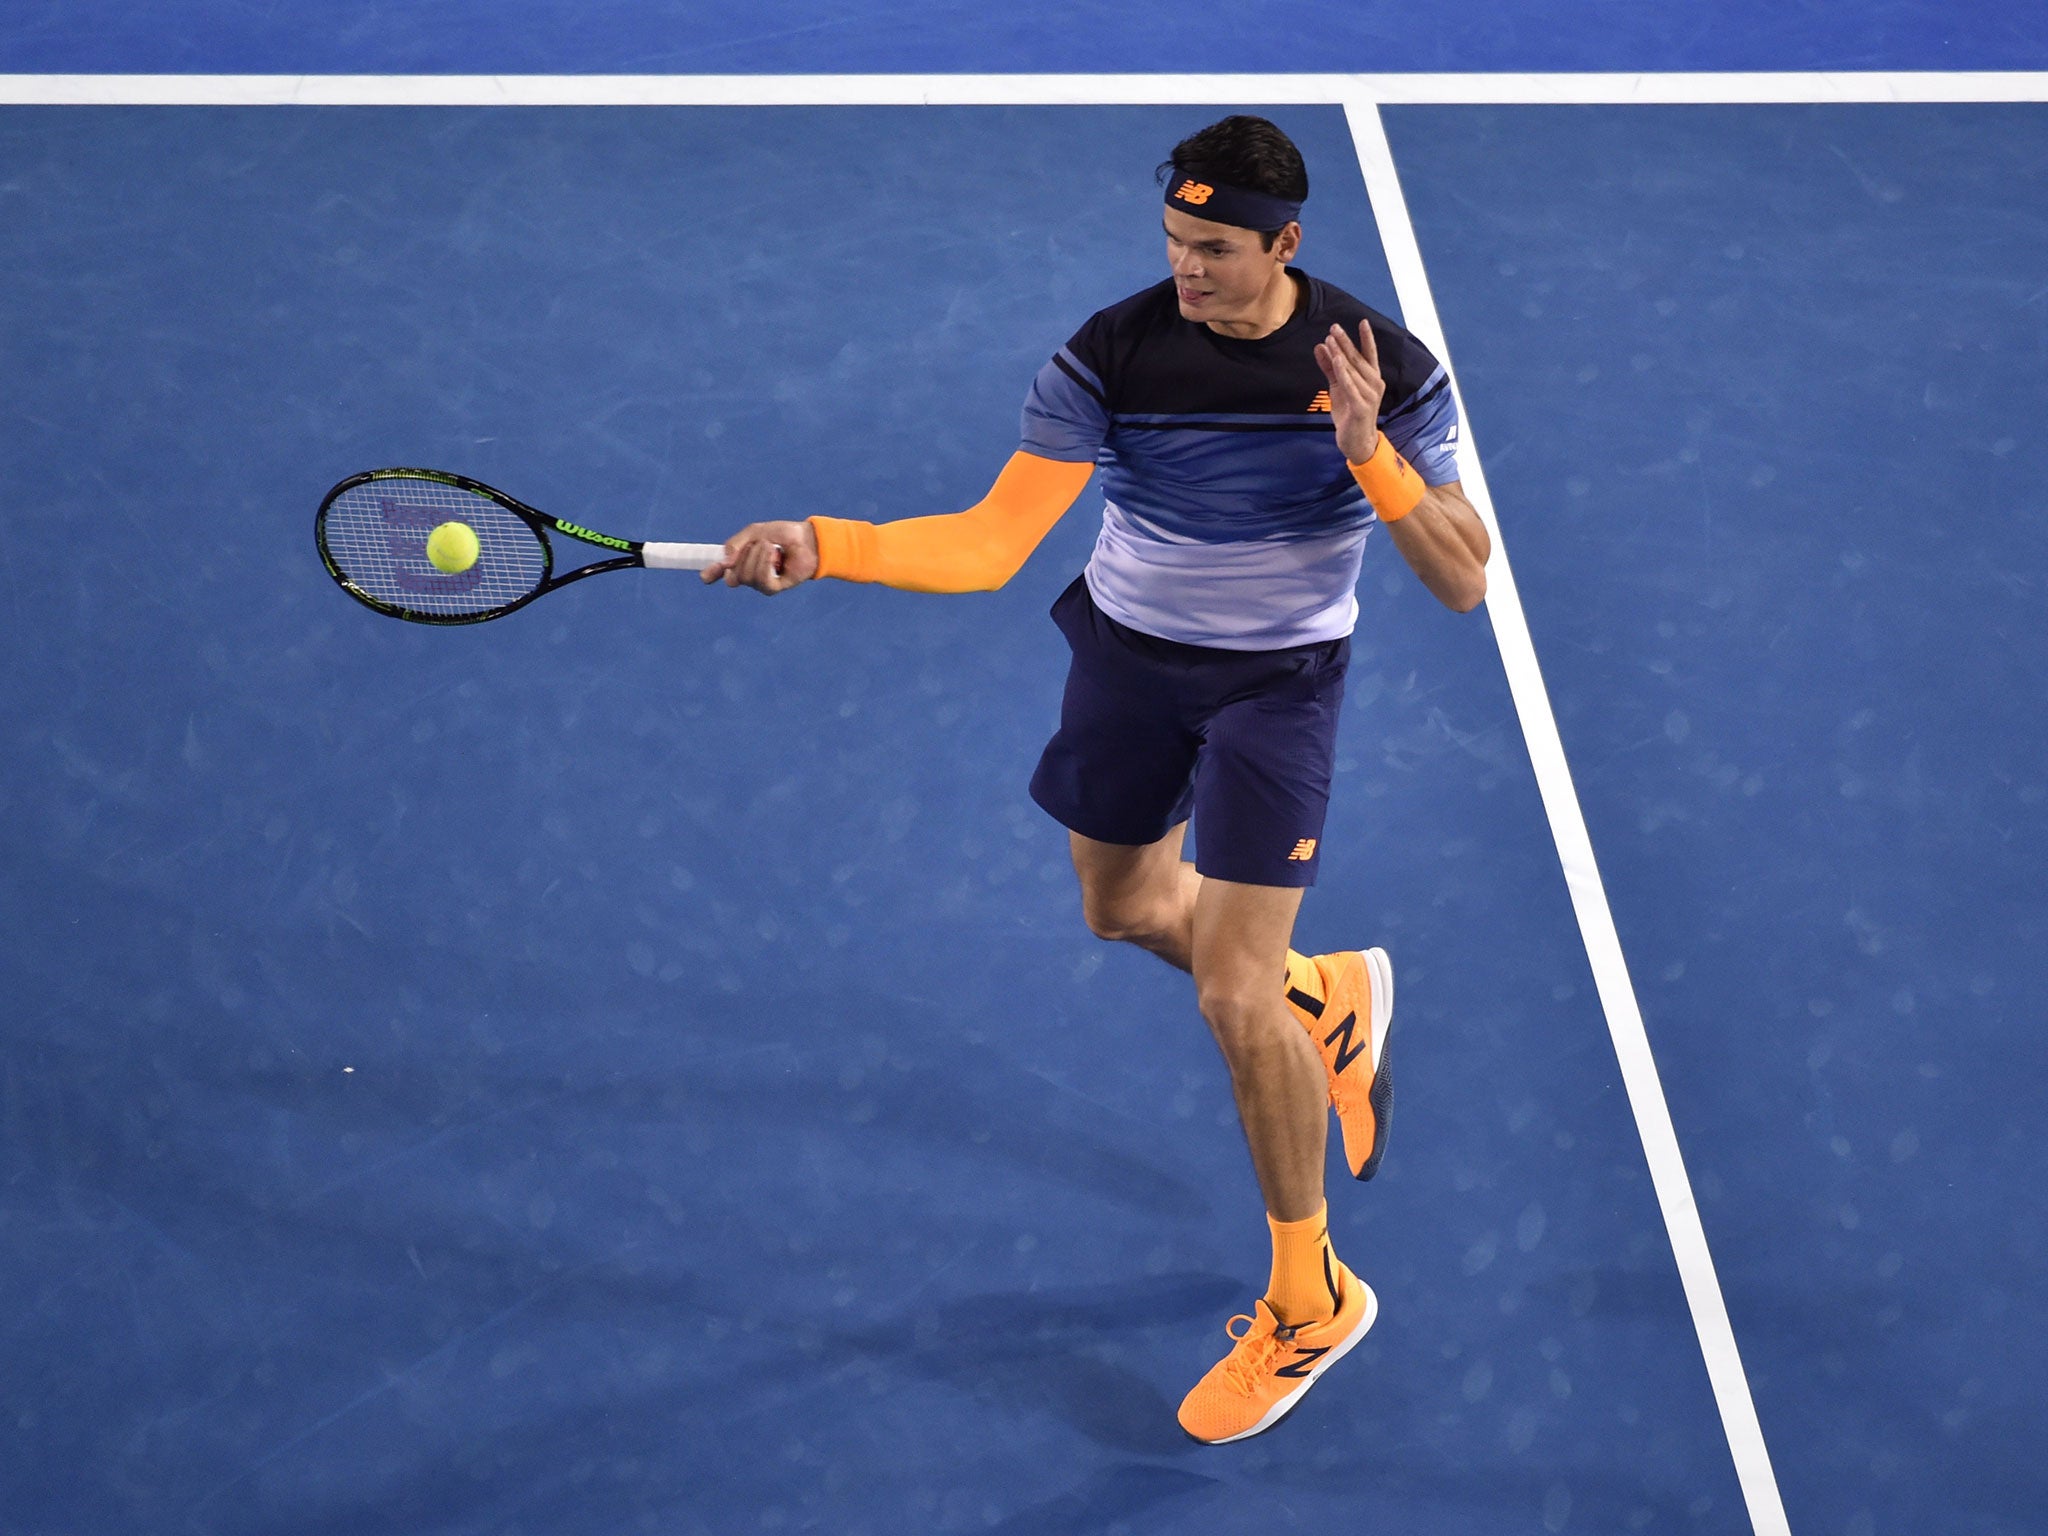 The forehand of Milos Raonic caused Andy Murray problems in the first three sets